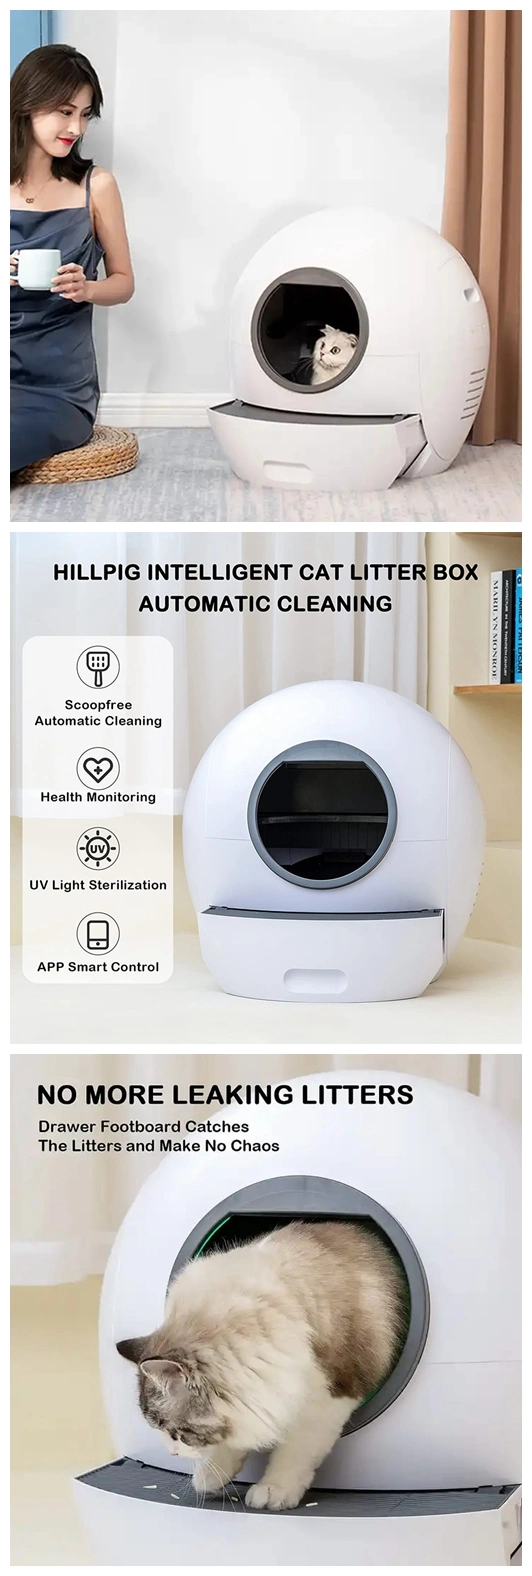 Multi Intelligent Function Auto Mode Smart Control WiFi Remote Cat Toilet Automatic Cleaning UV Light Indicating Cat Litter Box Tray Mute Work Cat Litter Box